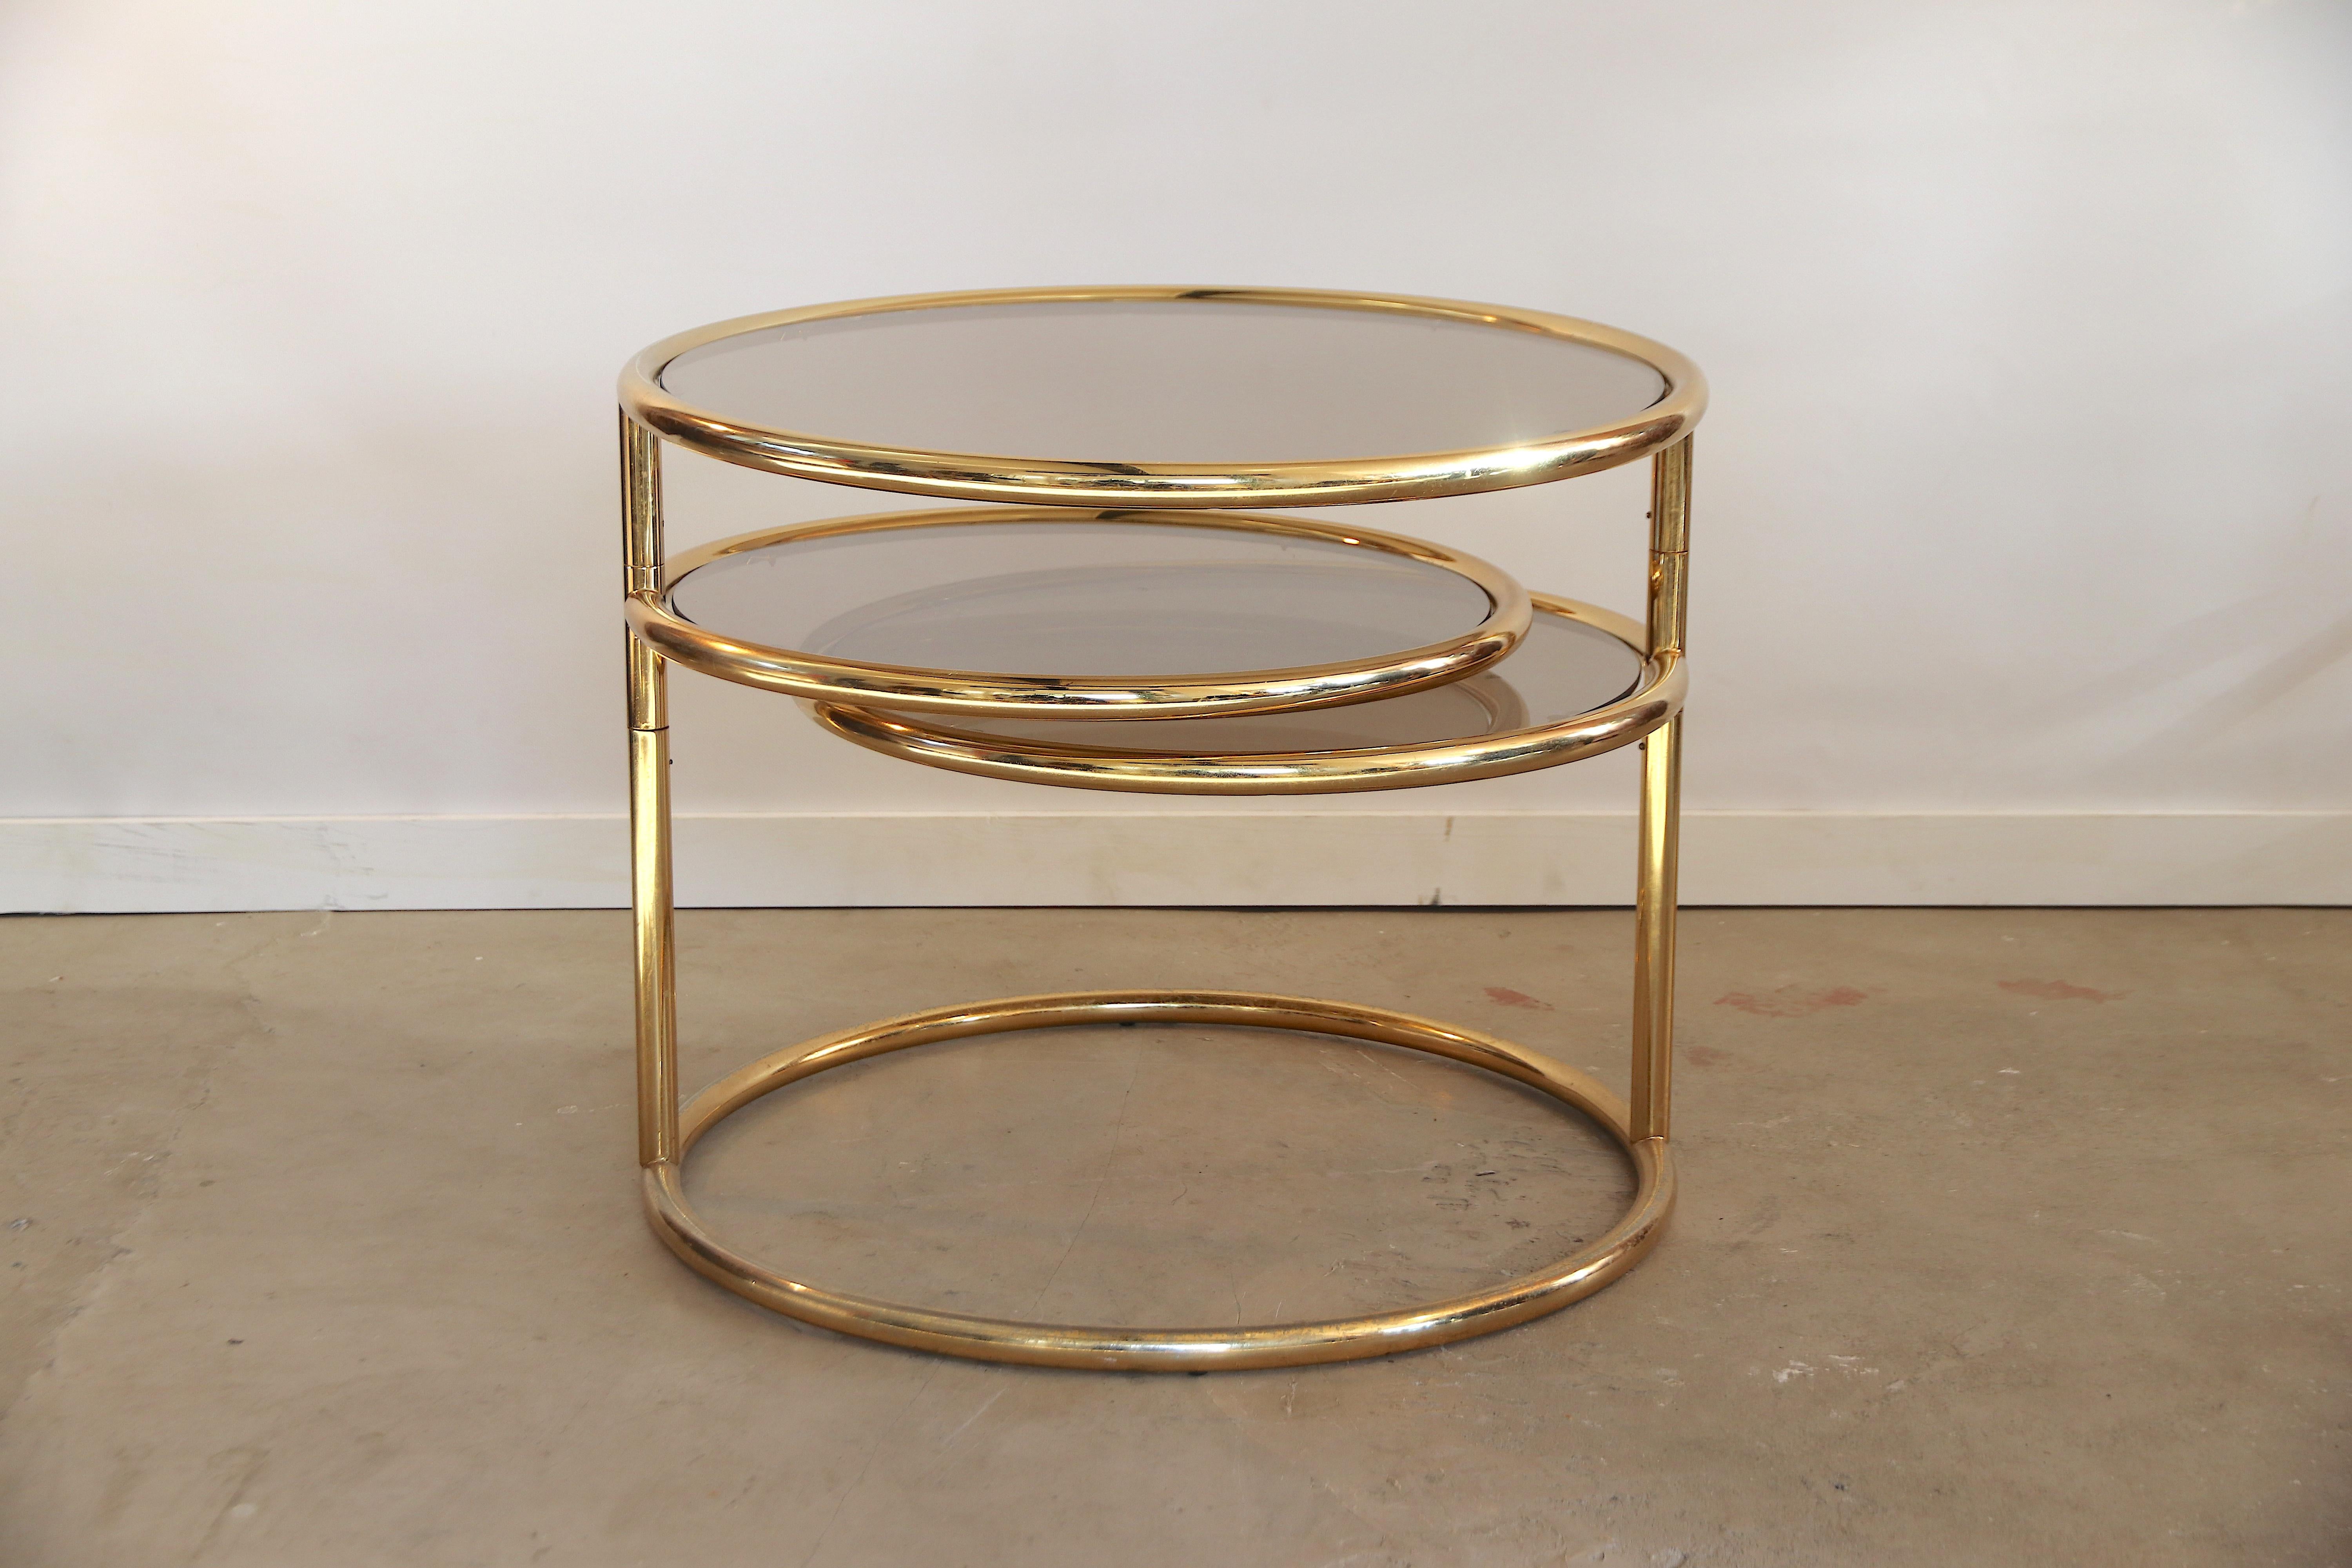 Very rare to find shiny brass 3-tier coffee or side table with completely unscratched smoked bronze-tinted glass. The upper glass top level is in a fixed position, the 2 lower level tops can swivel 360 degrees around, so while sitting on your sofa